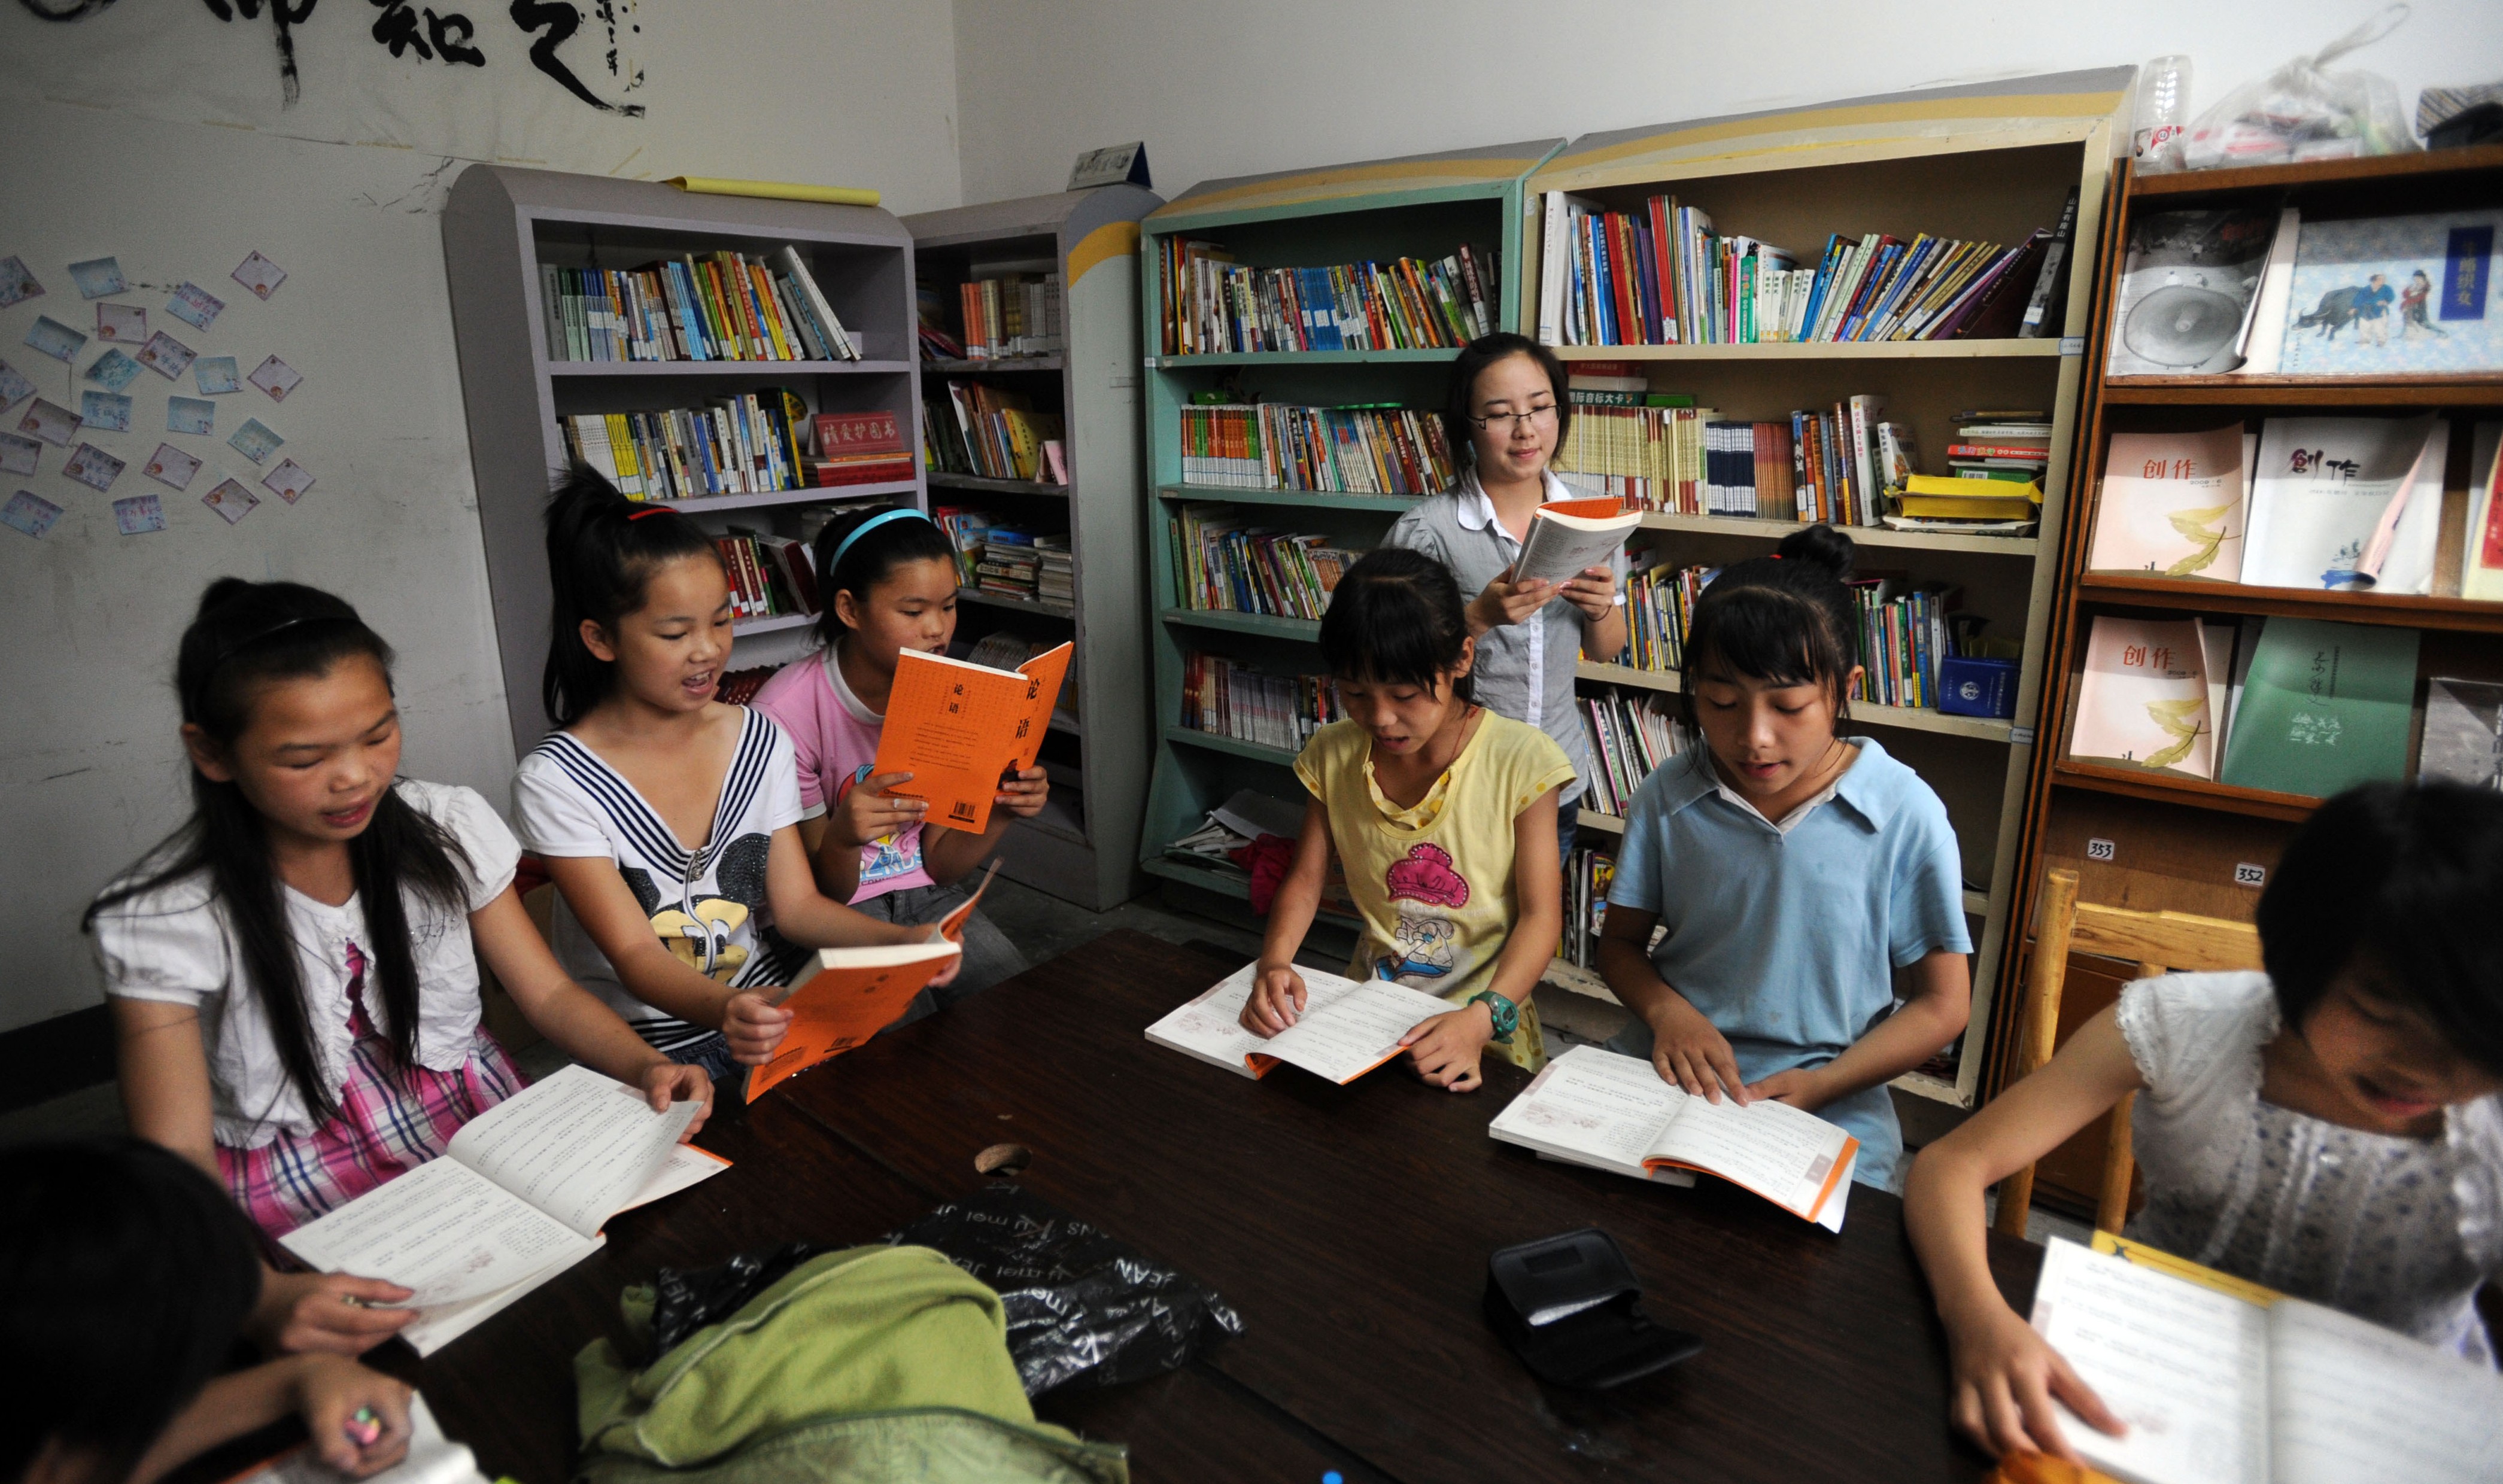 A volunteer who is a student from a local university teaches children at the Farmhouse School in Longdong village, Changsha city, China. Photo: Handout